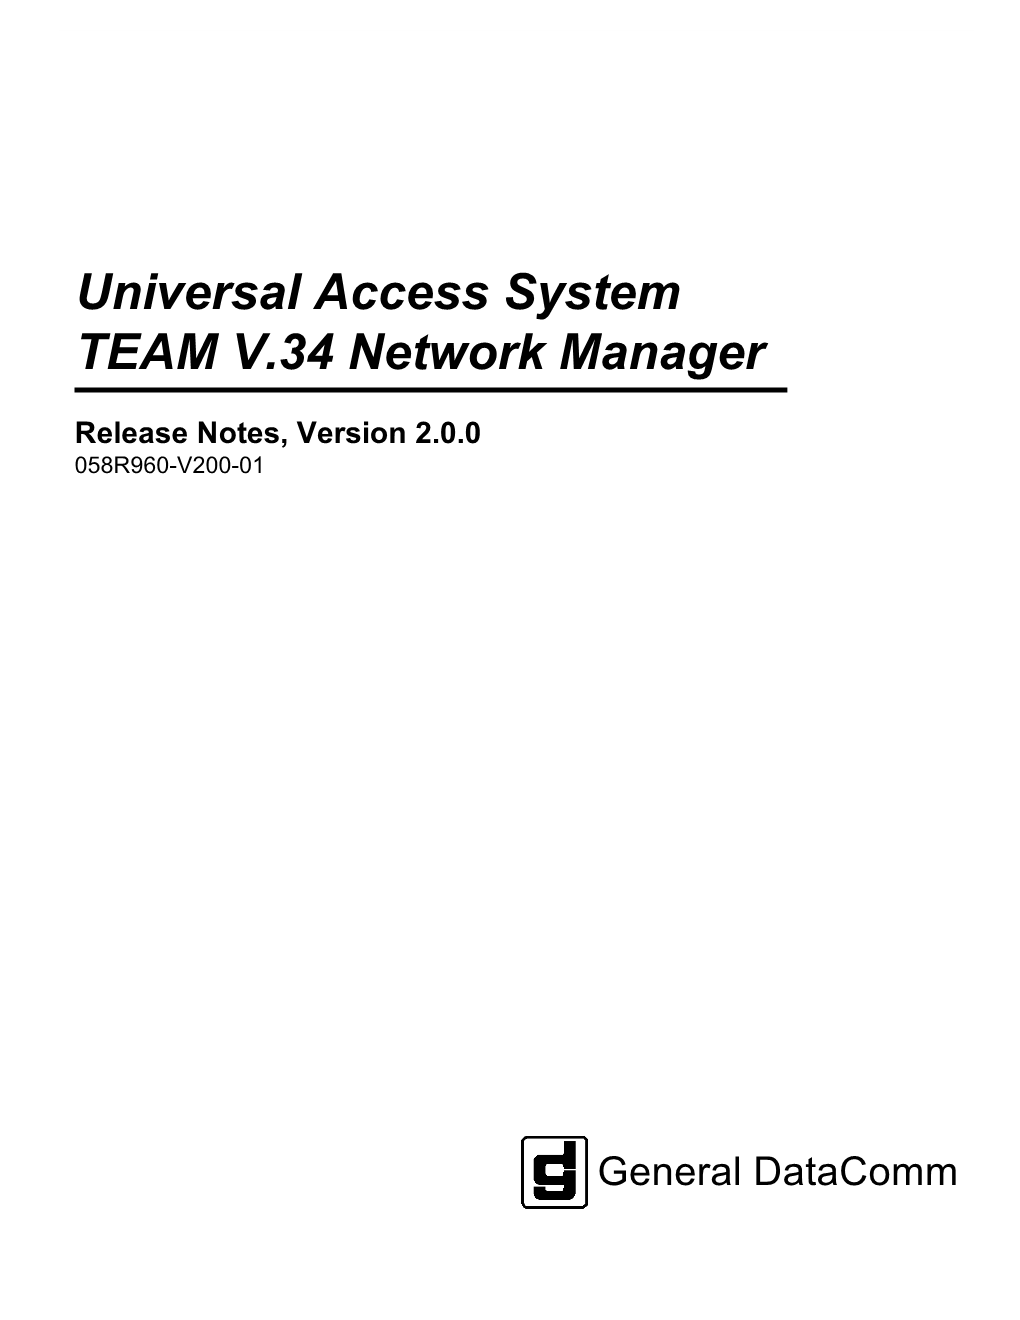 Universal Access System TEAM V.34 Network Manager